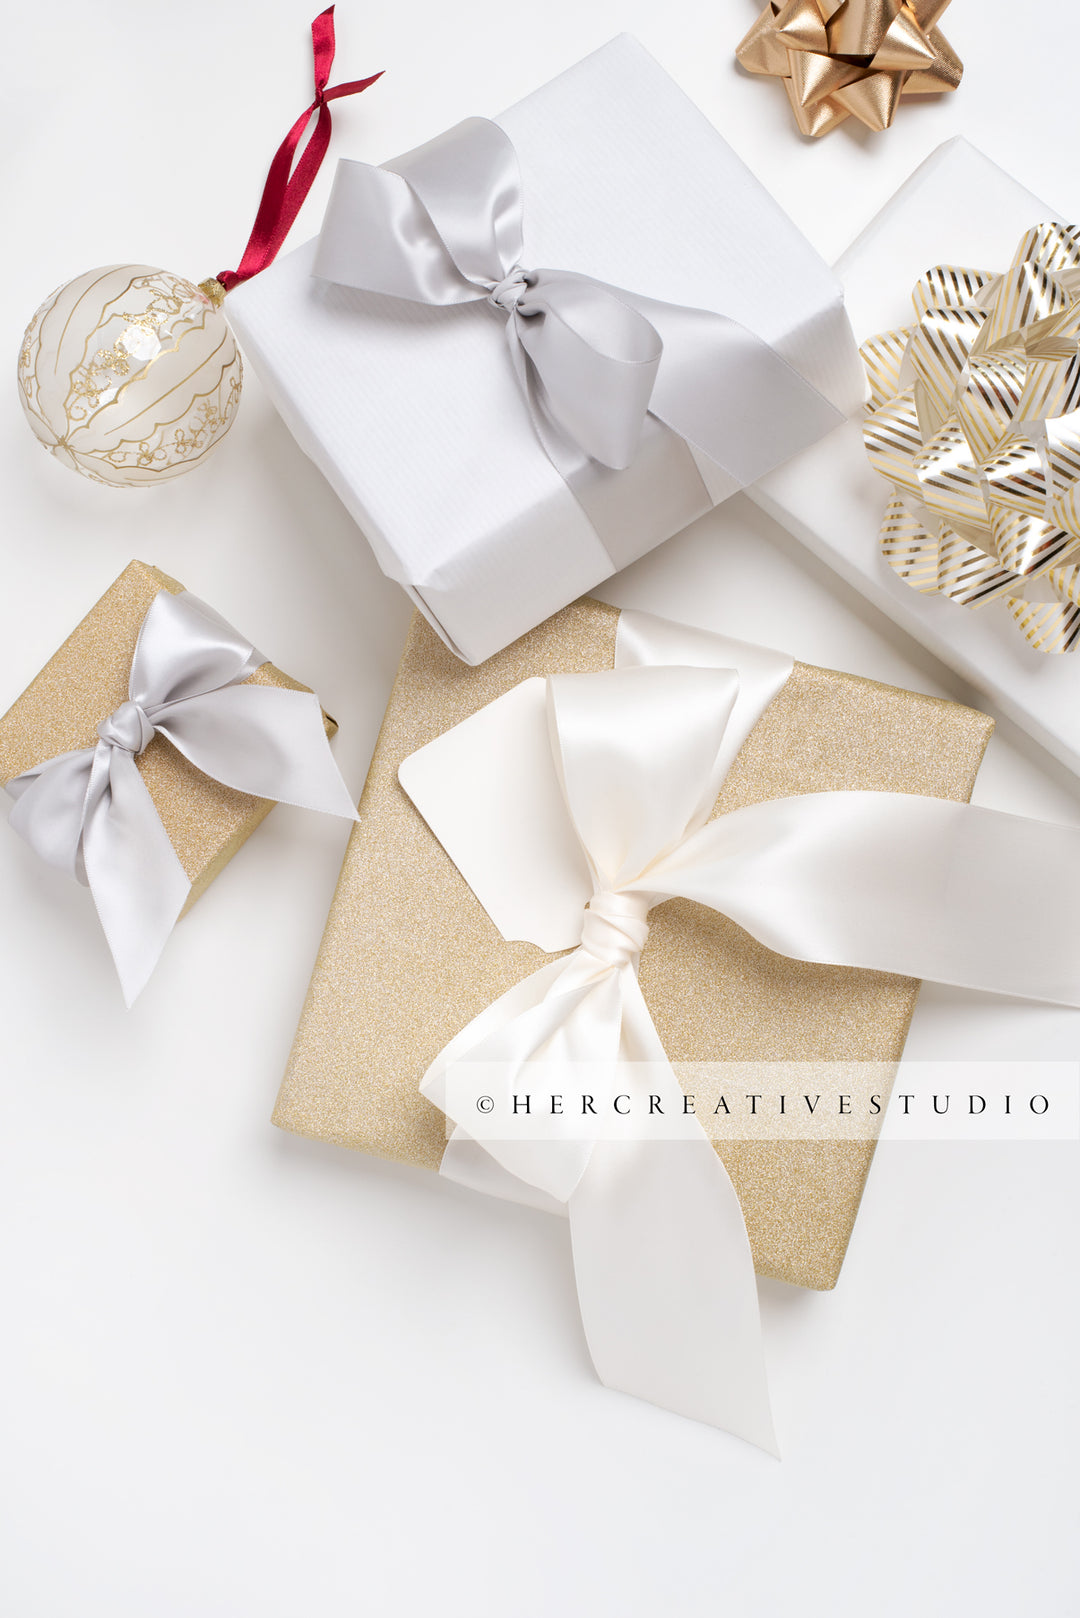 Gold Presents with Ribbon, Ornament on White Background